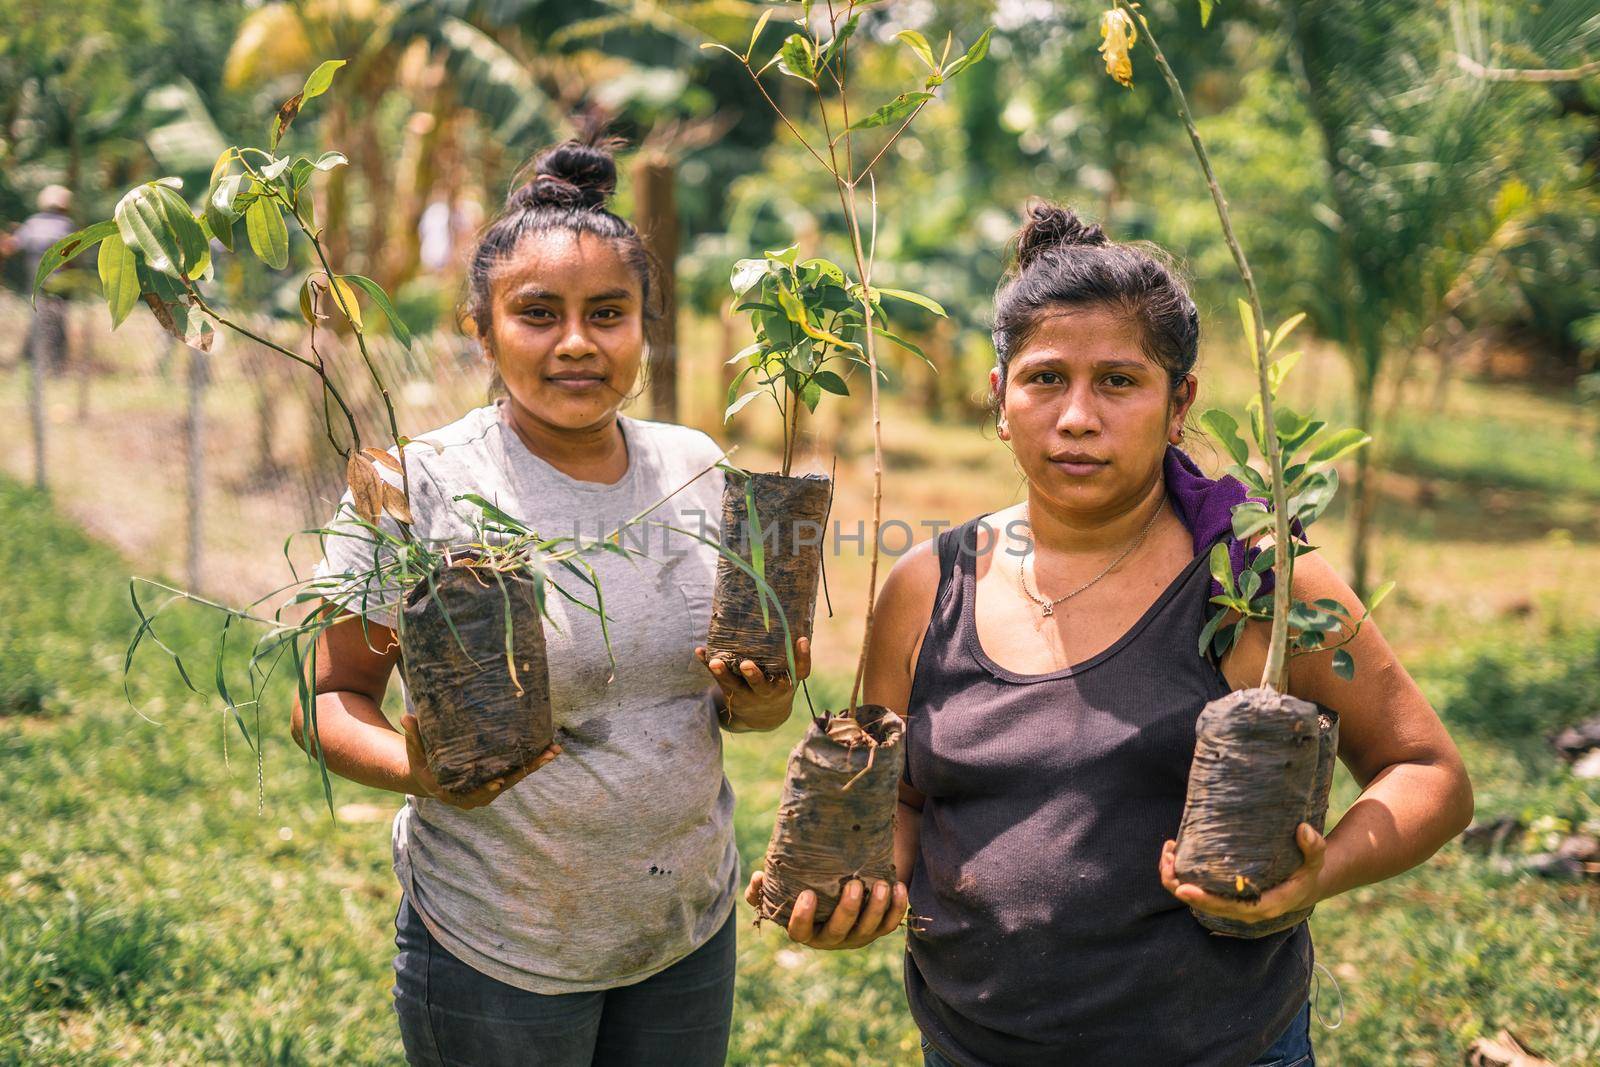 Nicaraguan women, mother and daughter holding plants in their hands and looking at camera in rural Nicaragua by cfalvarez